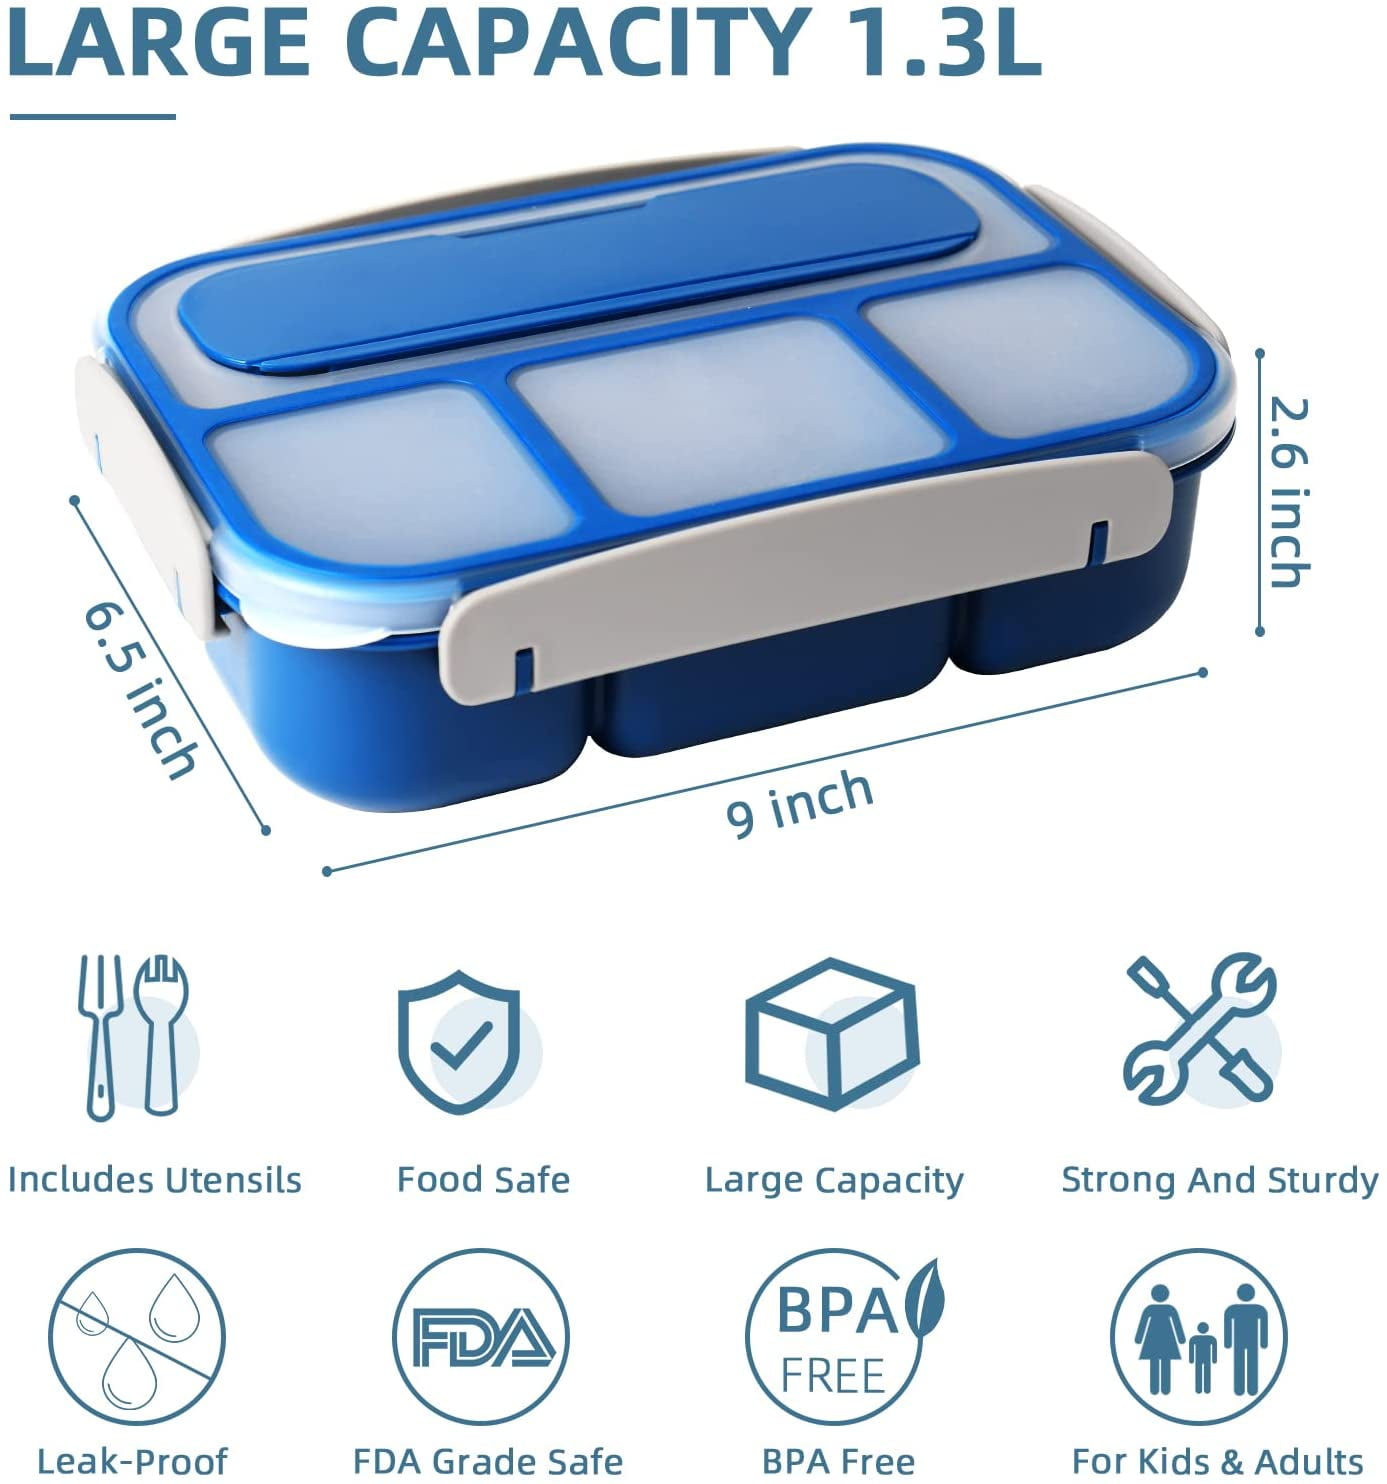 Bento Lunch Box - 4 Compartment – Mama & Ivy